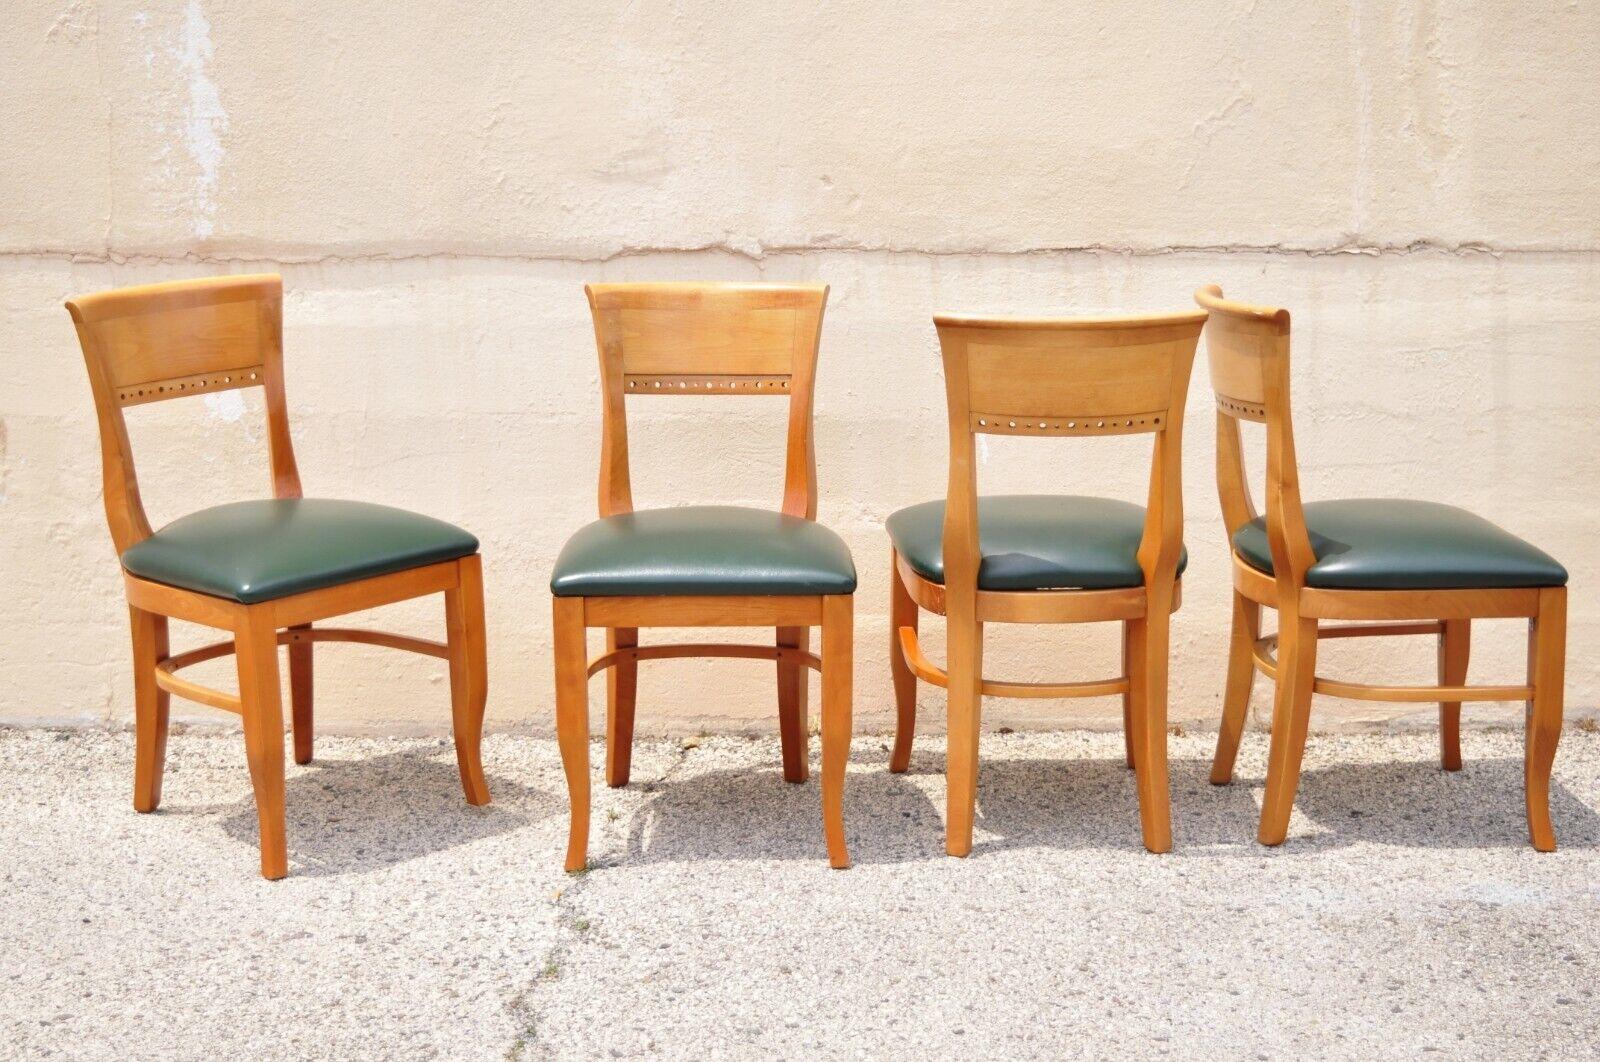 Art Deco style maple wood dining chairs by Prince Seating - Set of 8. Item features (8) Side chairs, solid wood construction, beautiful wood grain, original label. Circa mid to late 20th century. Measurements: 34.5